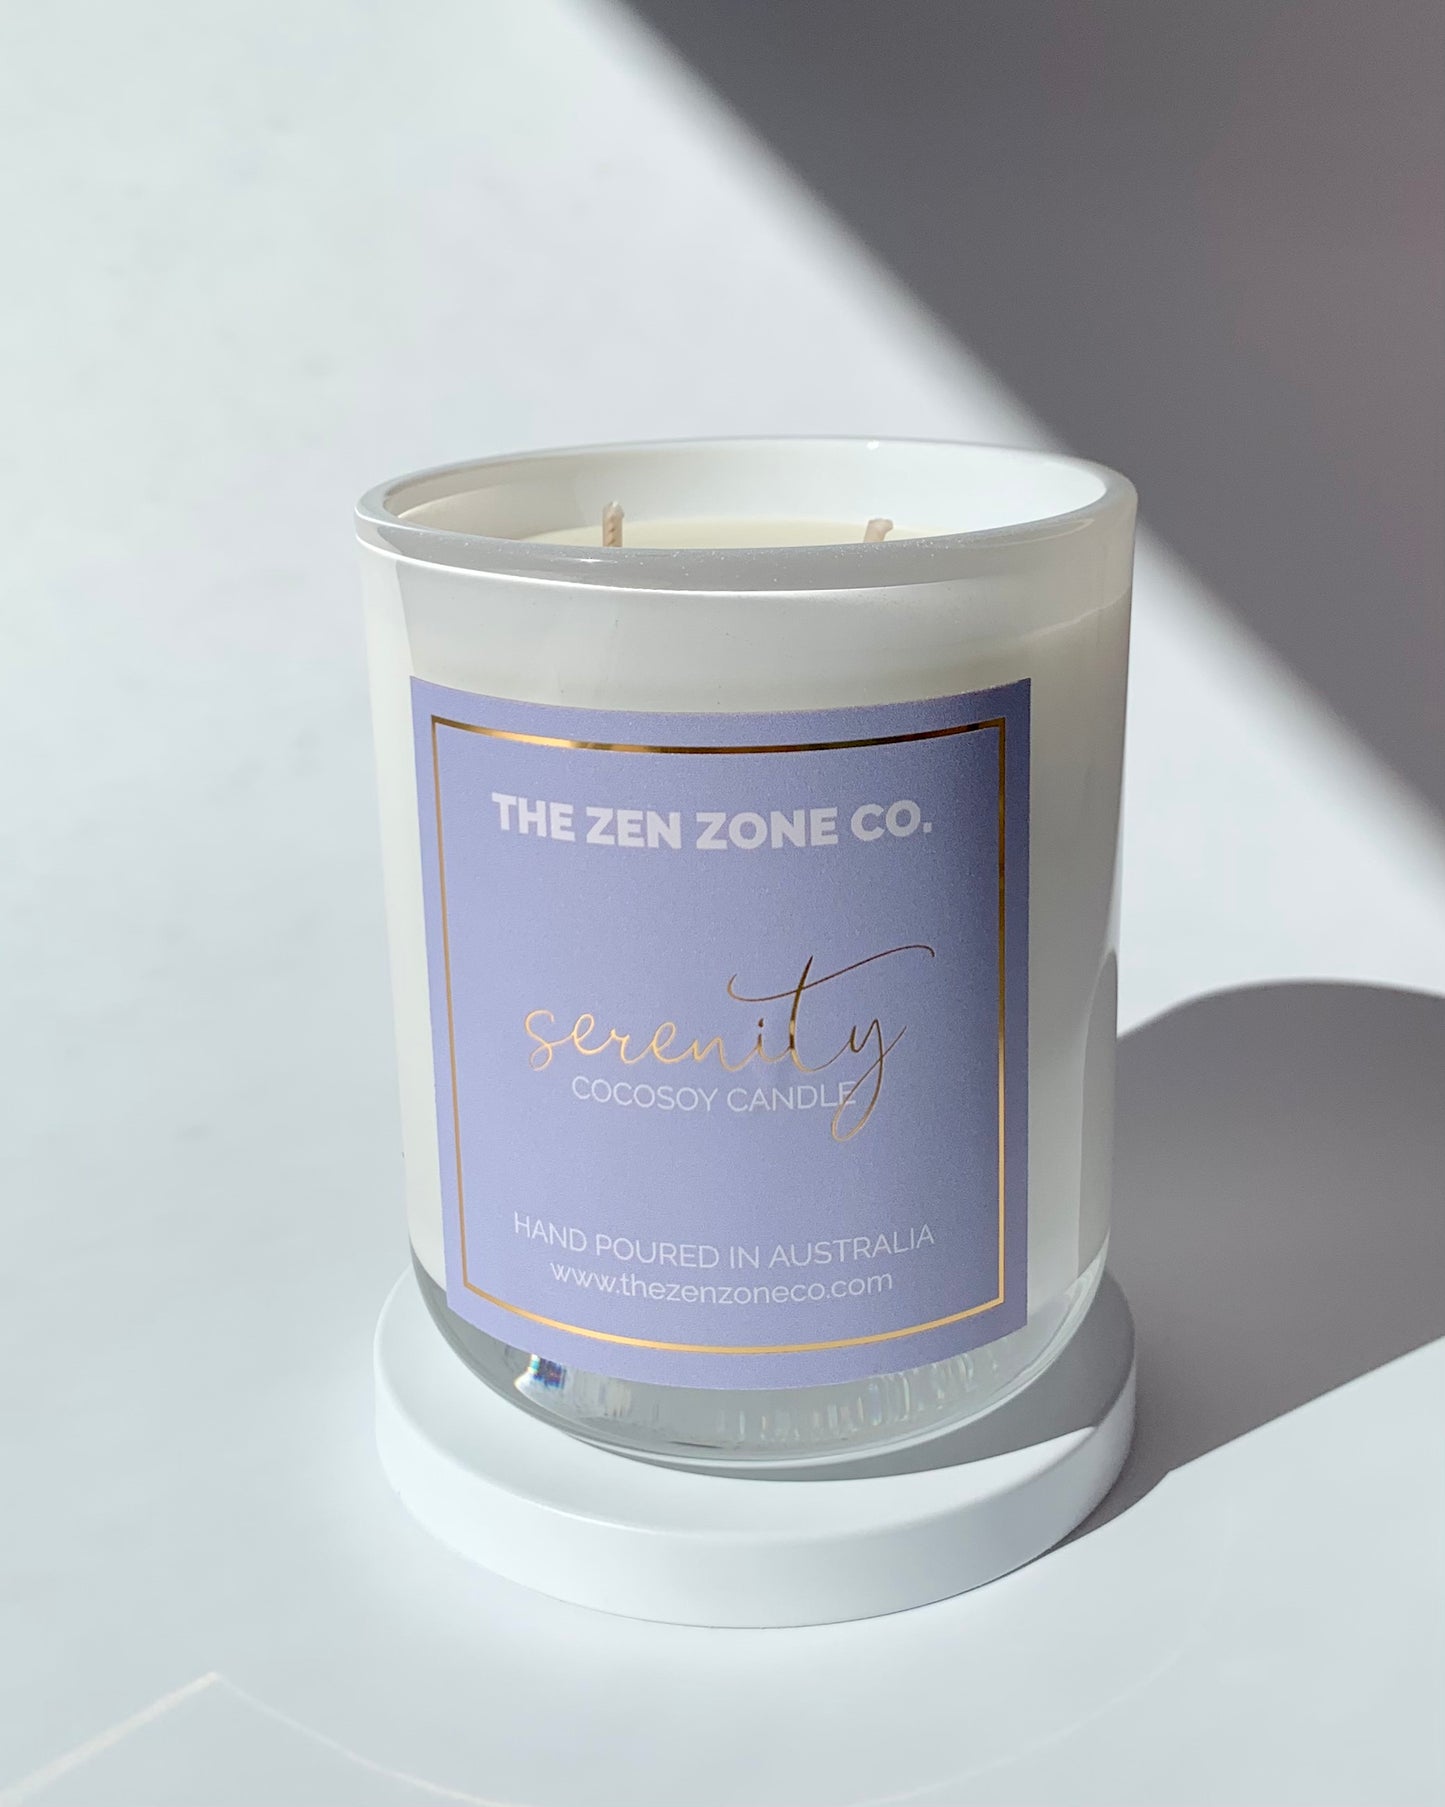 coconut and lime candle by The Zen Zone Co